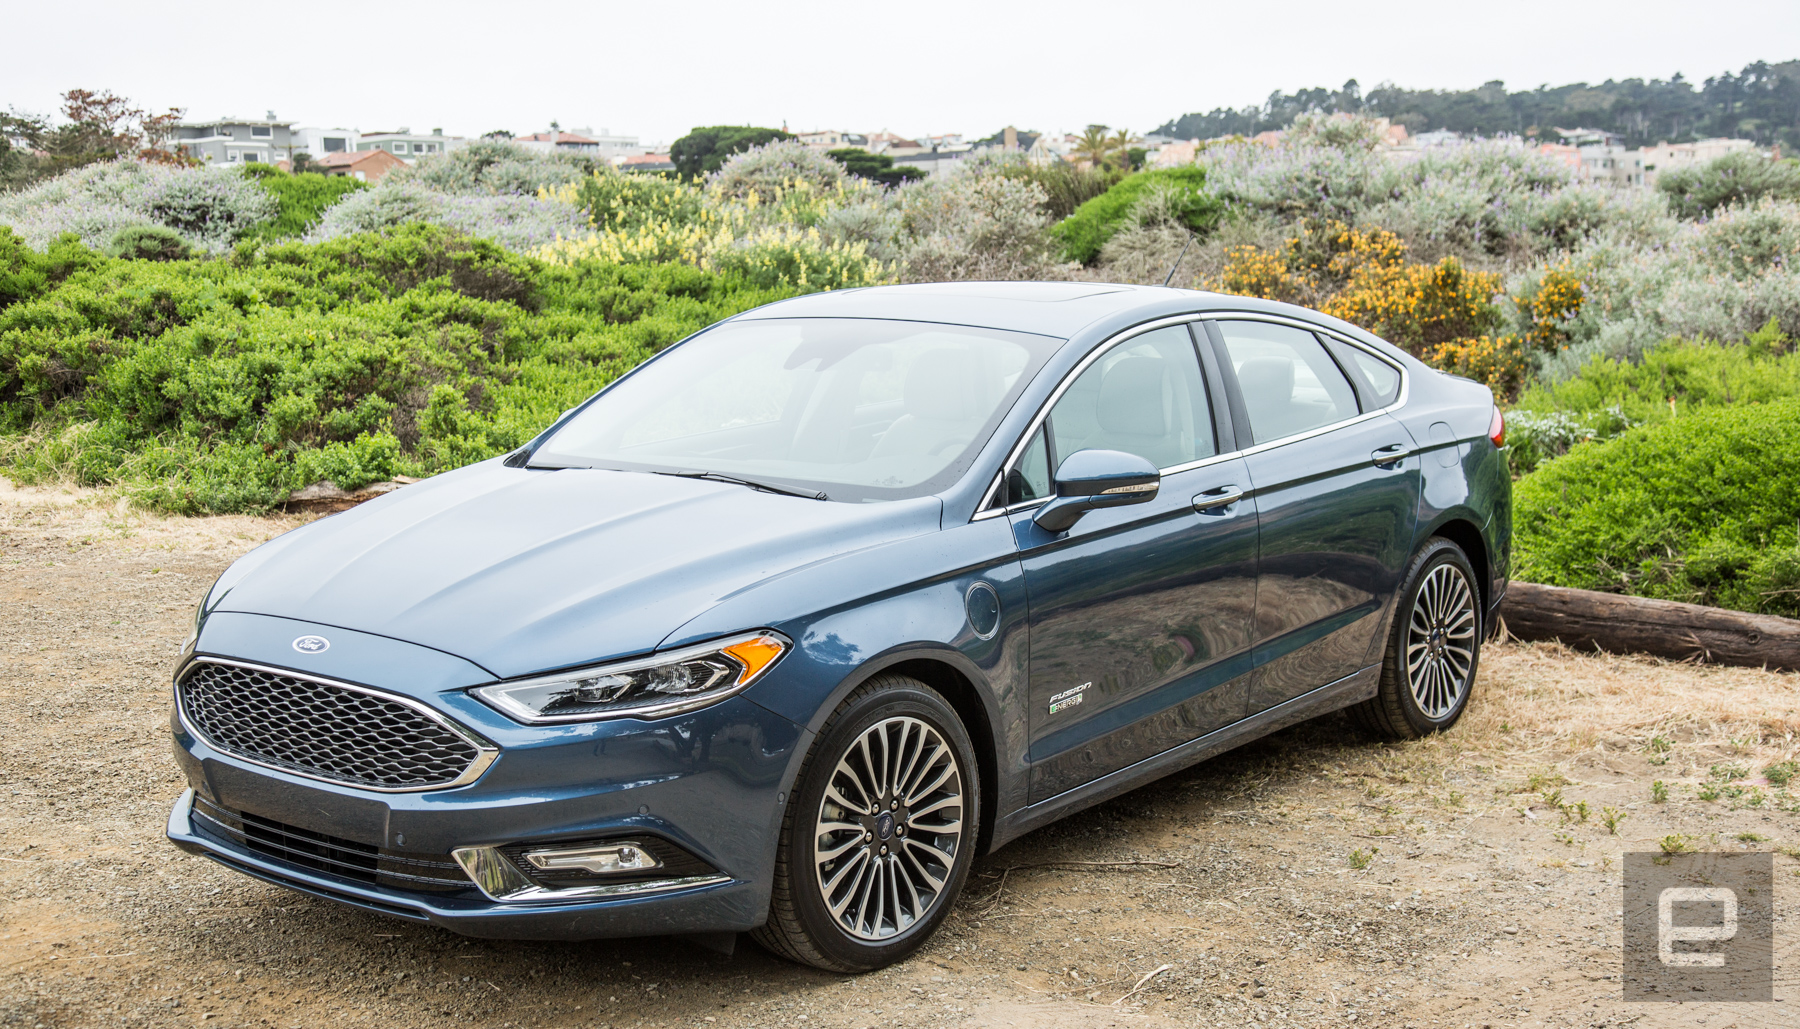 The Ford Fusion Energi hybrid is great but going away